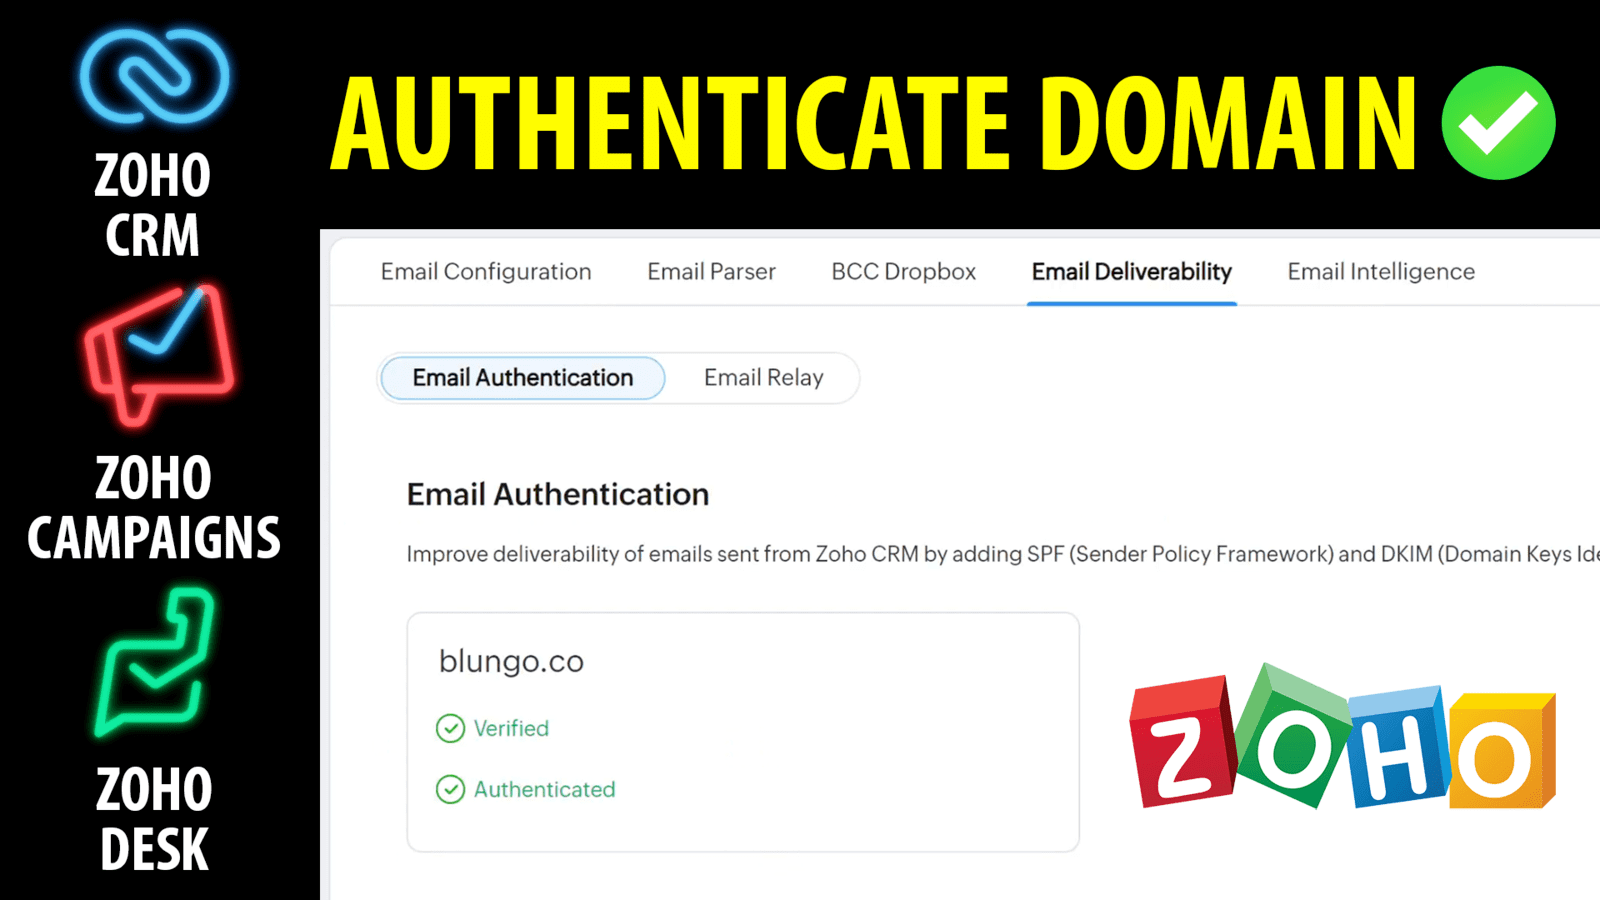 How to verify domains on Zoho apps